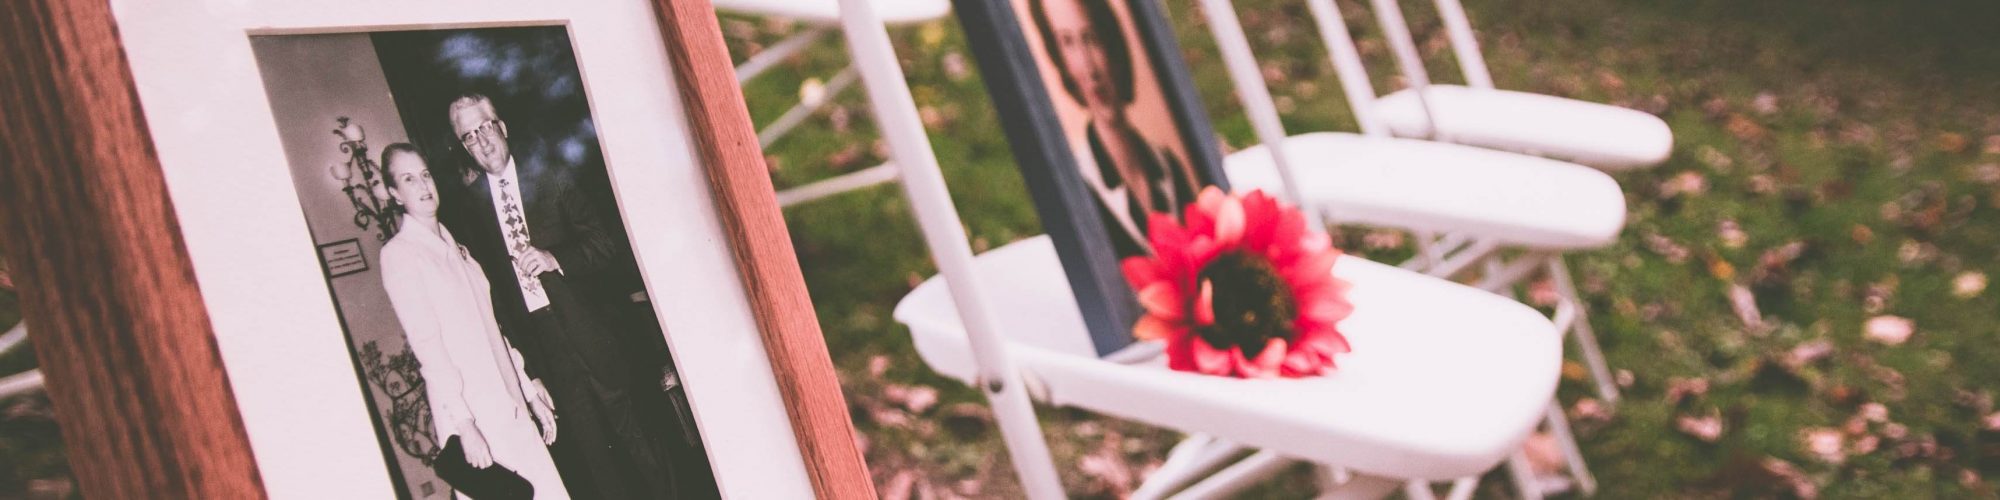 WRITING AN OBITUARY TEMPLATE: A GUIDE TO HONOURING YOUR LOVED ONE